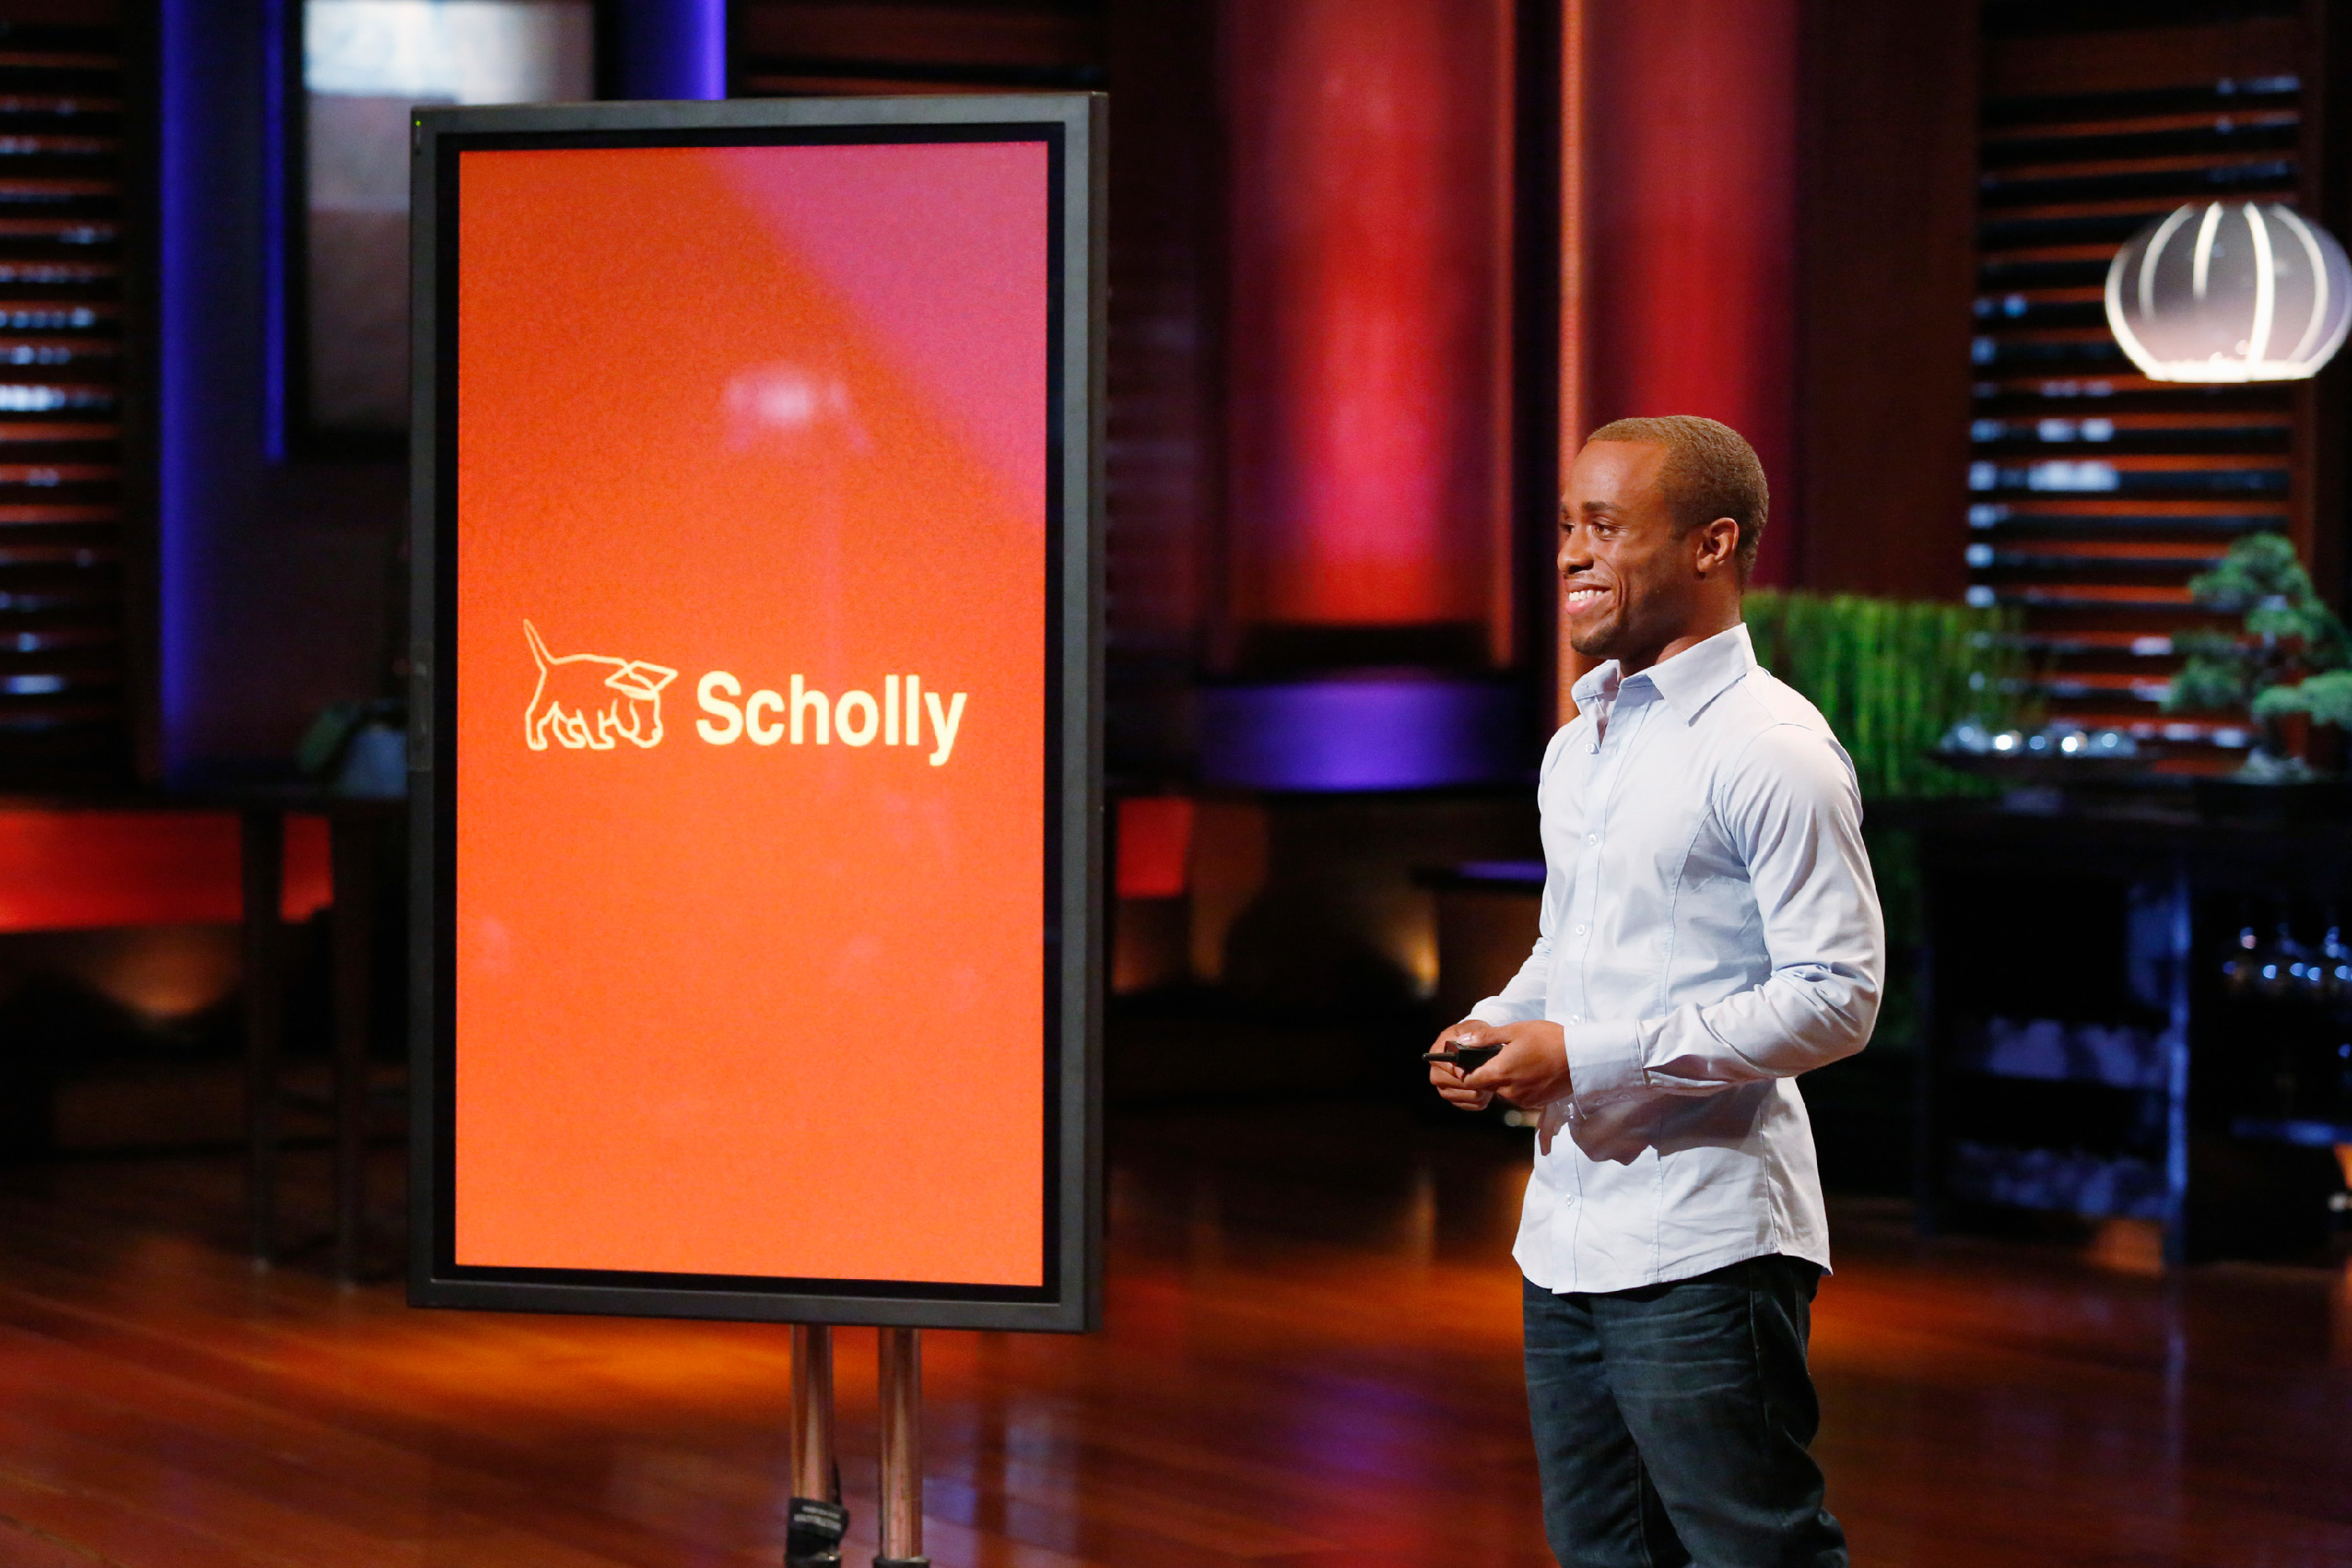 Gray pitched Scholly on ABC's  Shark Tank —and landed $40,000 in funding.